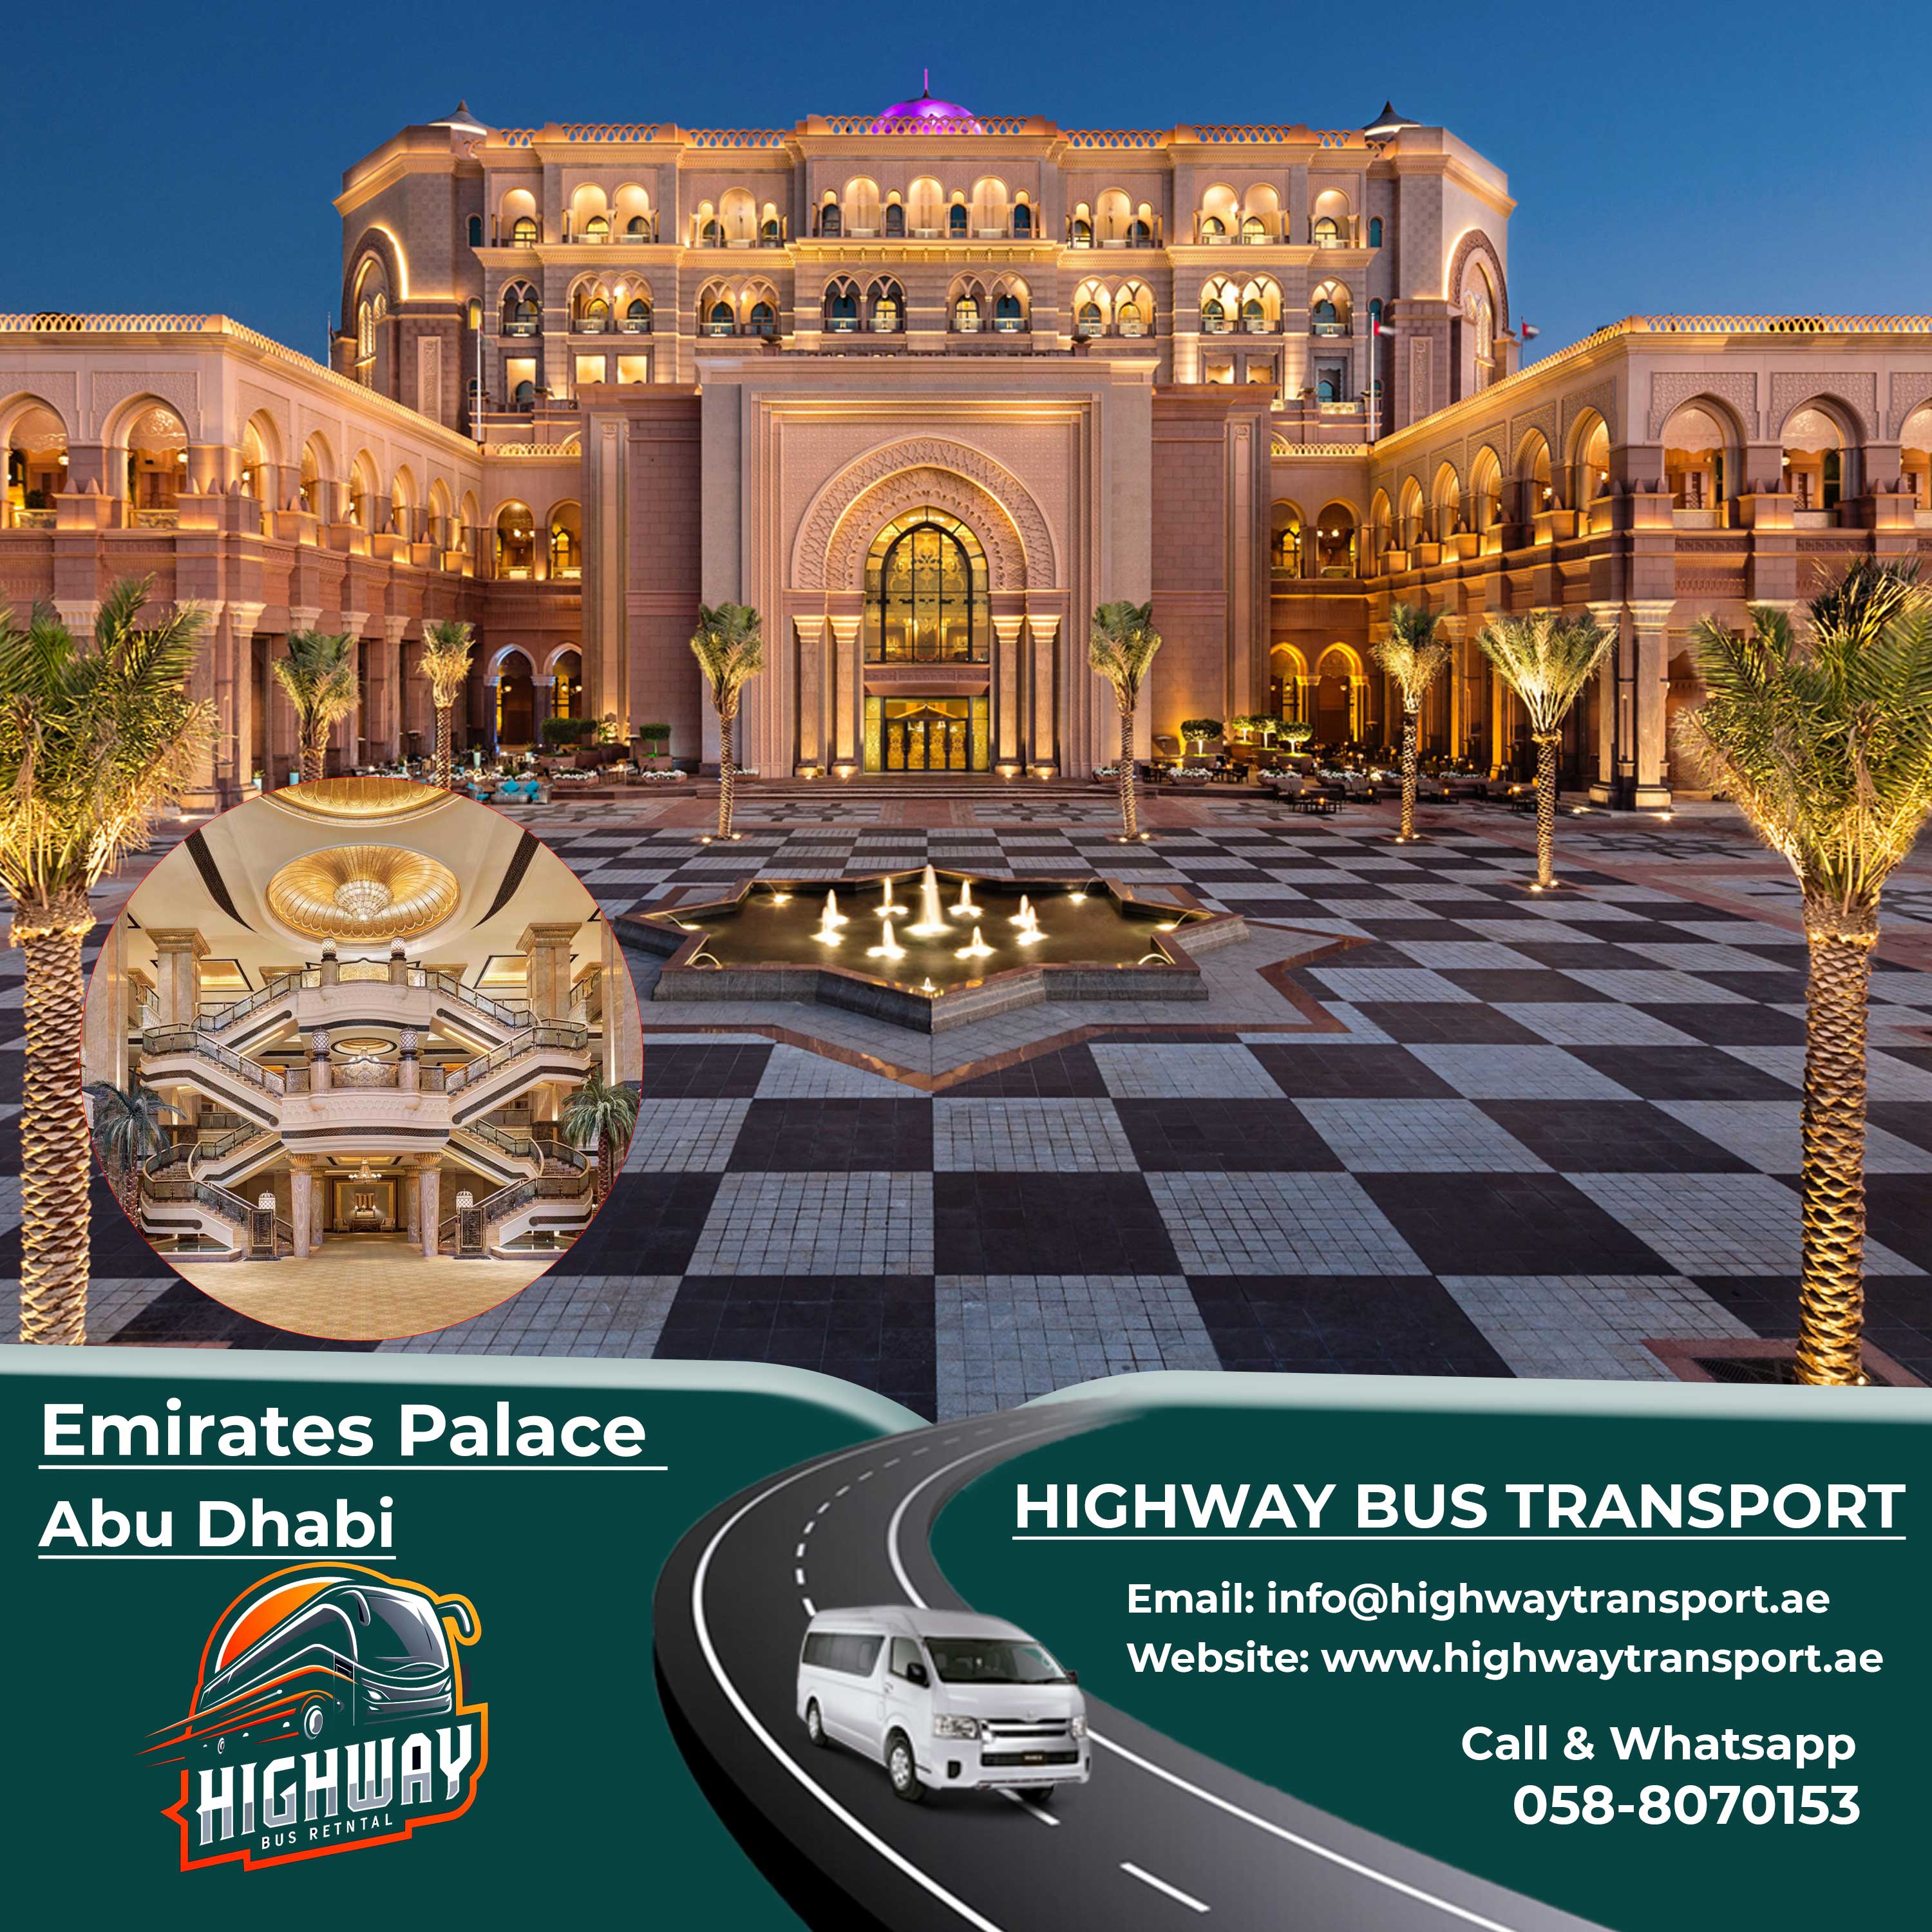 Emirates Palace high tea booking at luxurious restaurants with dress code